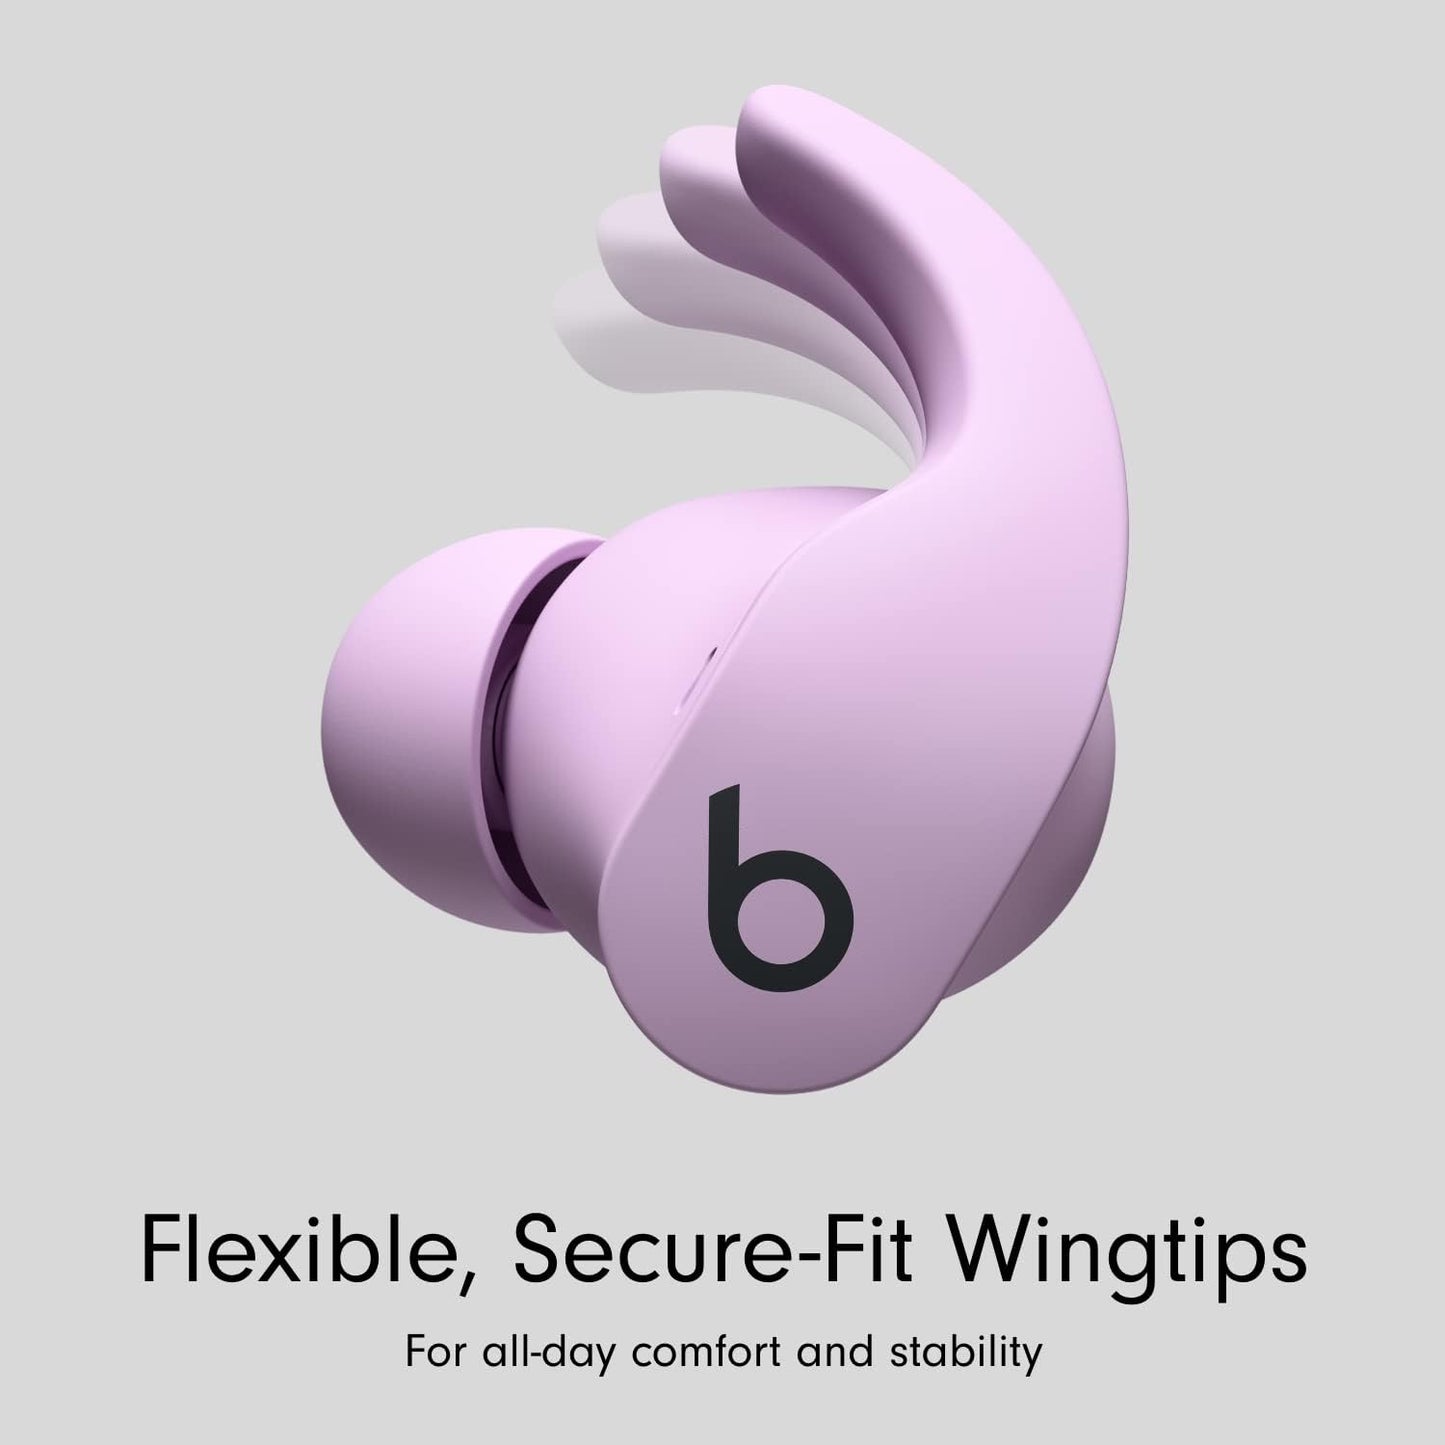 Beats Fit Pro - True Wireless Noise Cancelling Earbuds • Apple H1 Headphone Chip • Compatible with Apple & Android • Class 1 Bluetooth • Built-in Microphone • 6 Hours of Listening Time • Beats Stone Purple